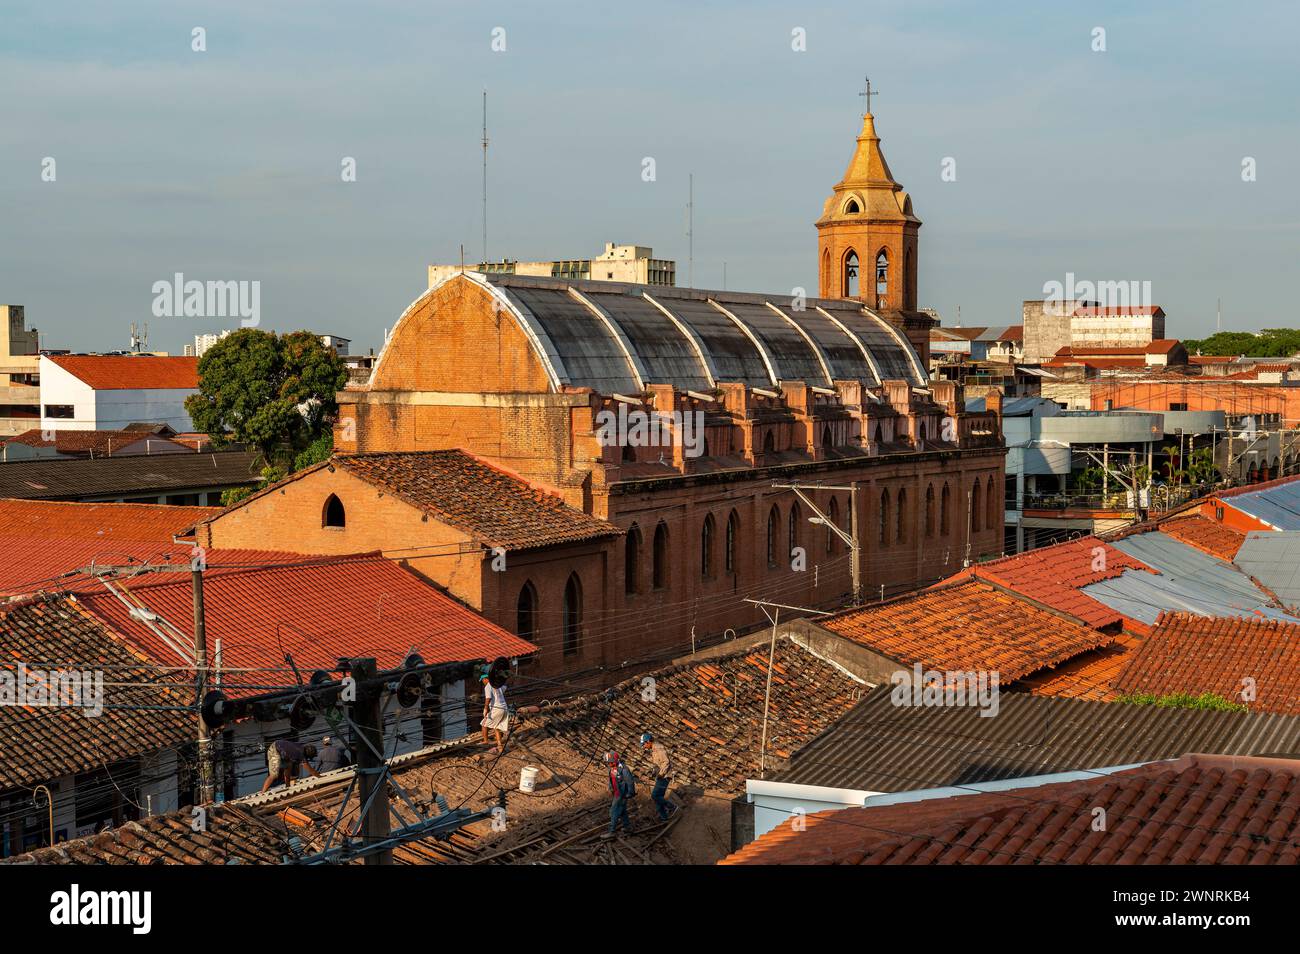 Merced church at sunrise with people working on the roof of a house, Santa Cruz de la Sierra, Bolivia. Stock Photo